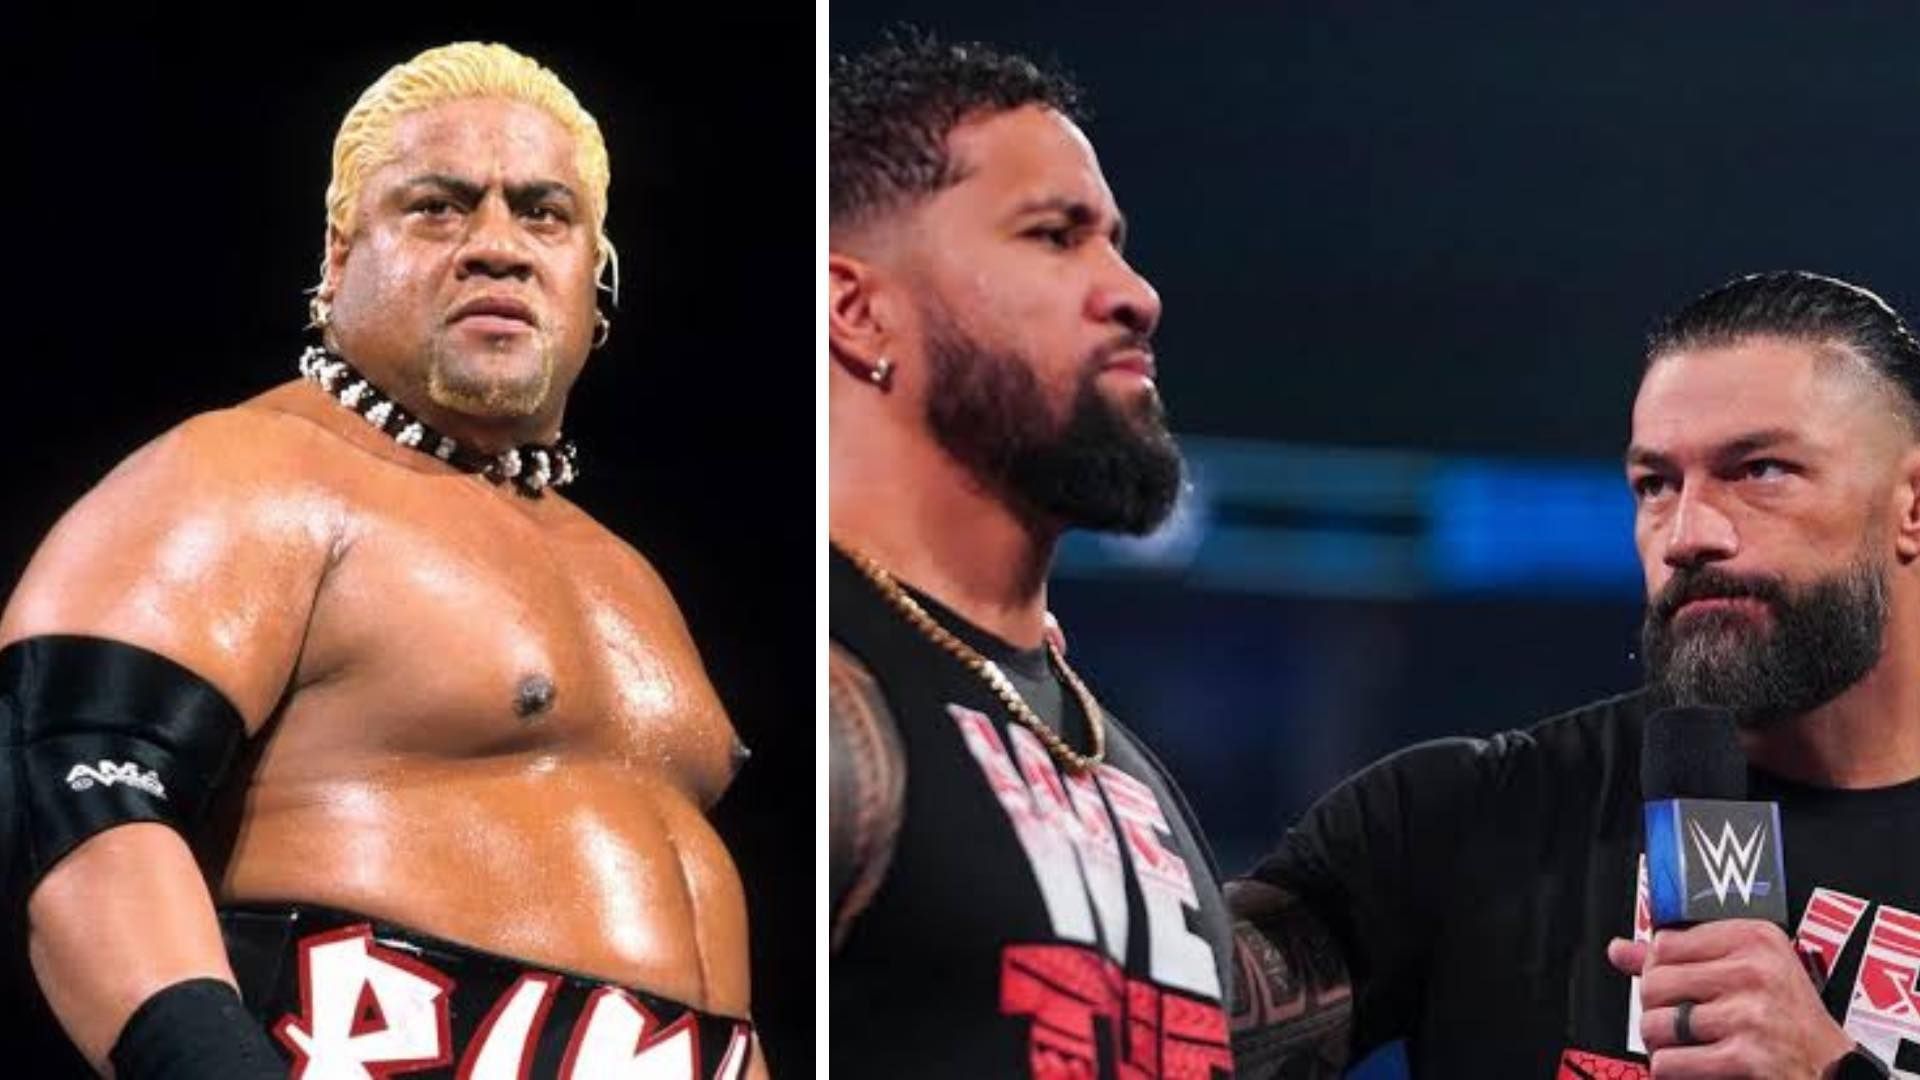 WWE legend Rikishi is part of The Bloodline